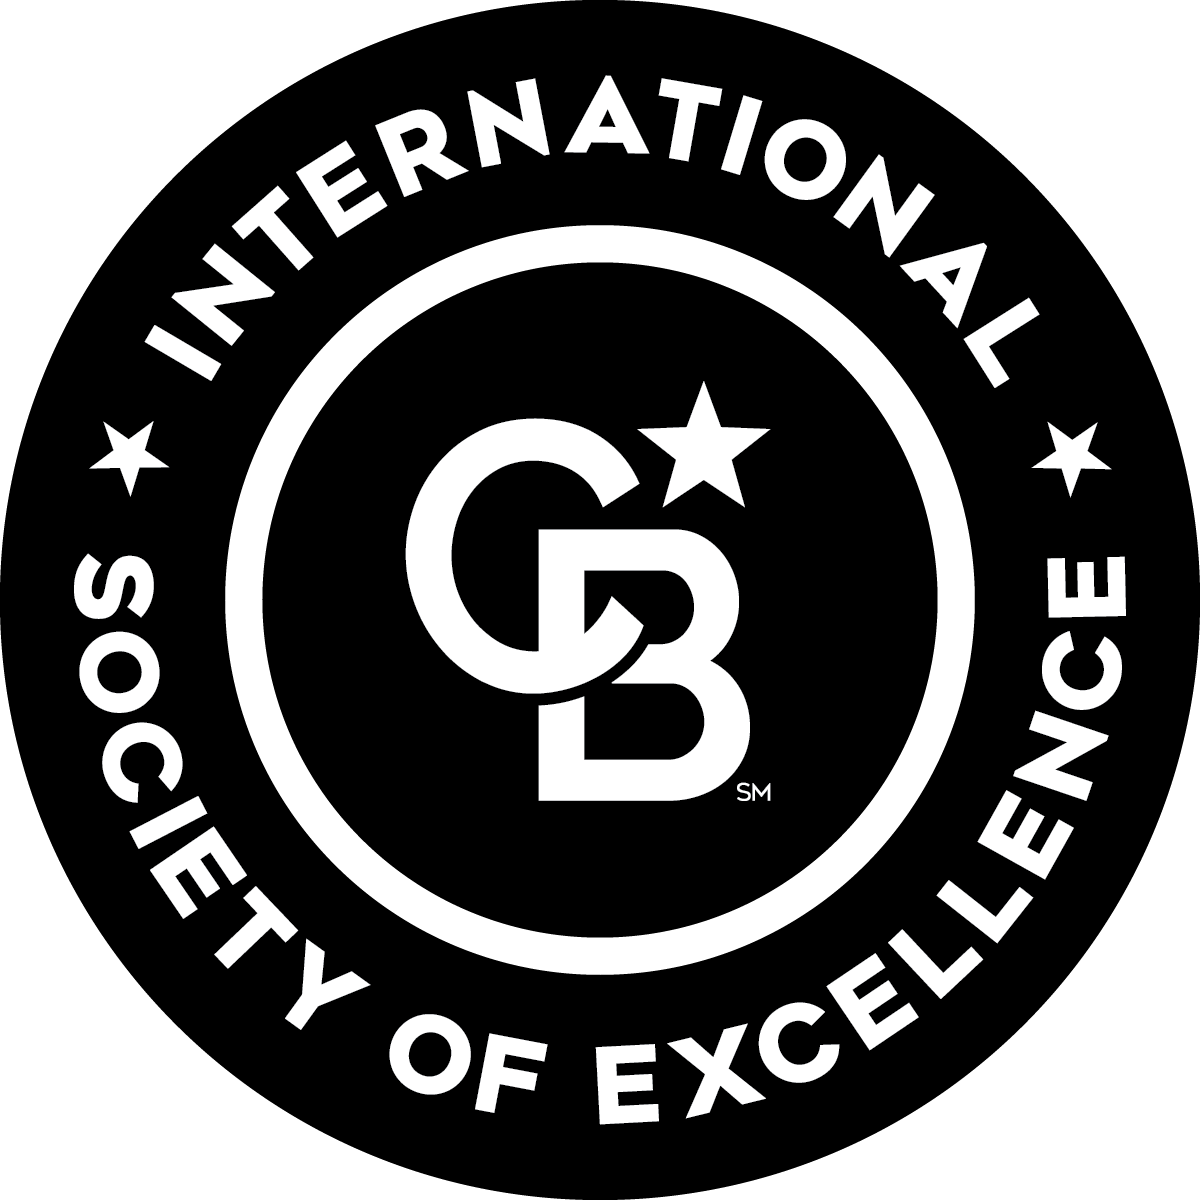 Society of Excellence